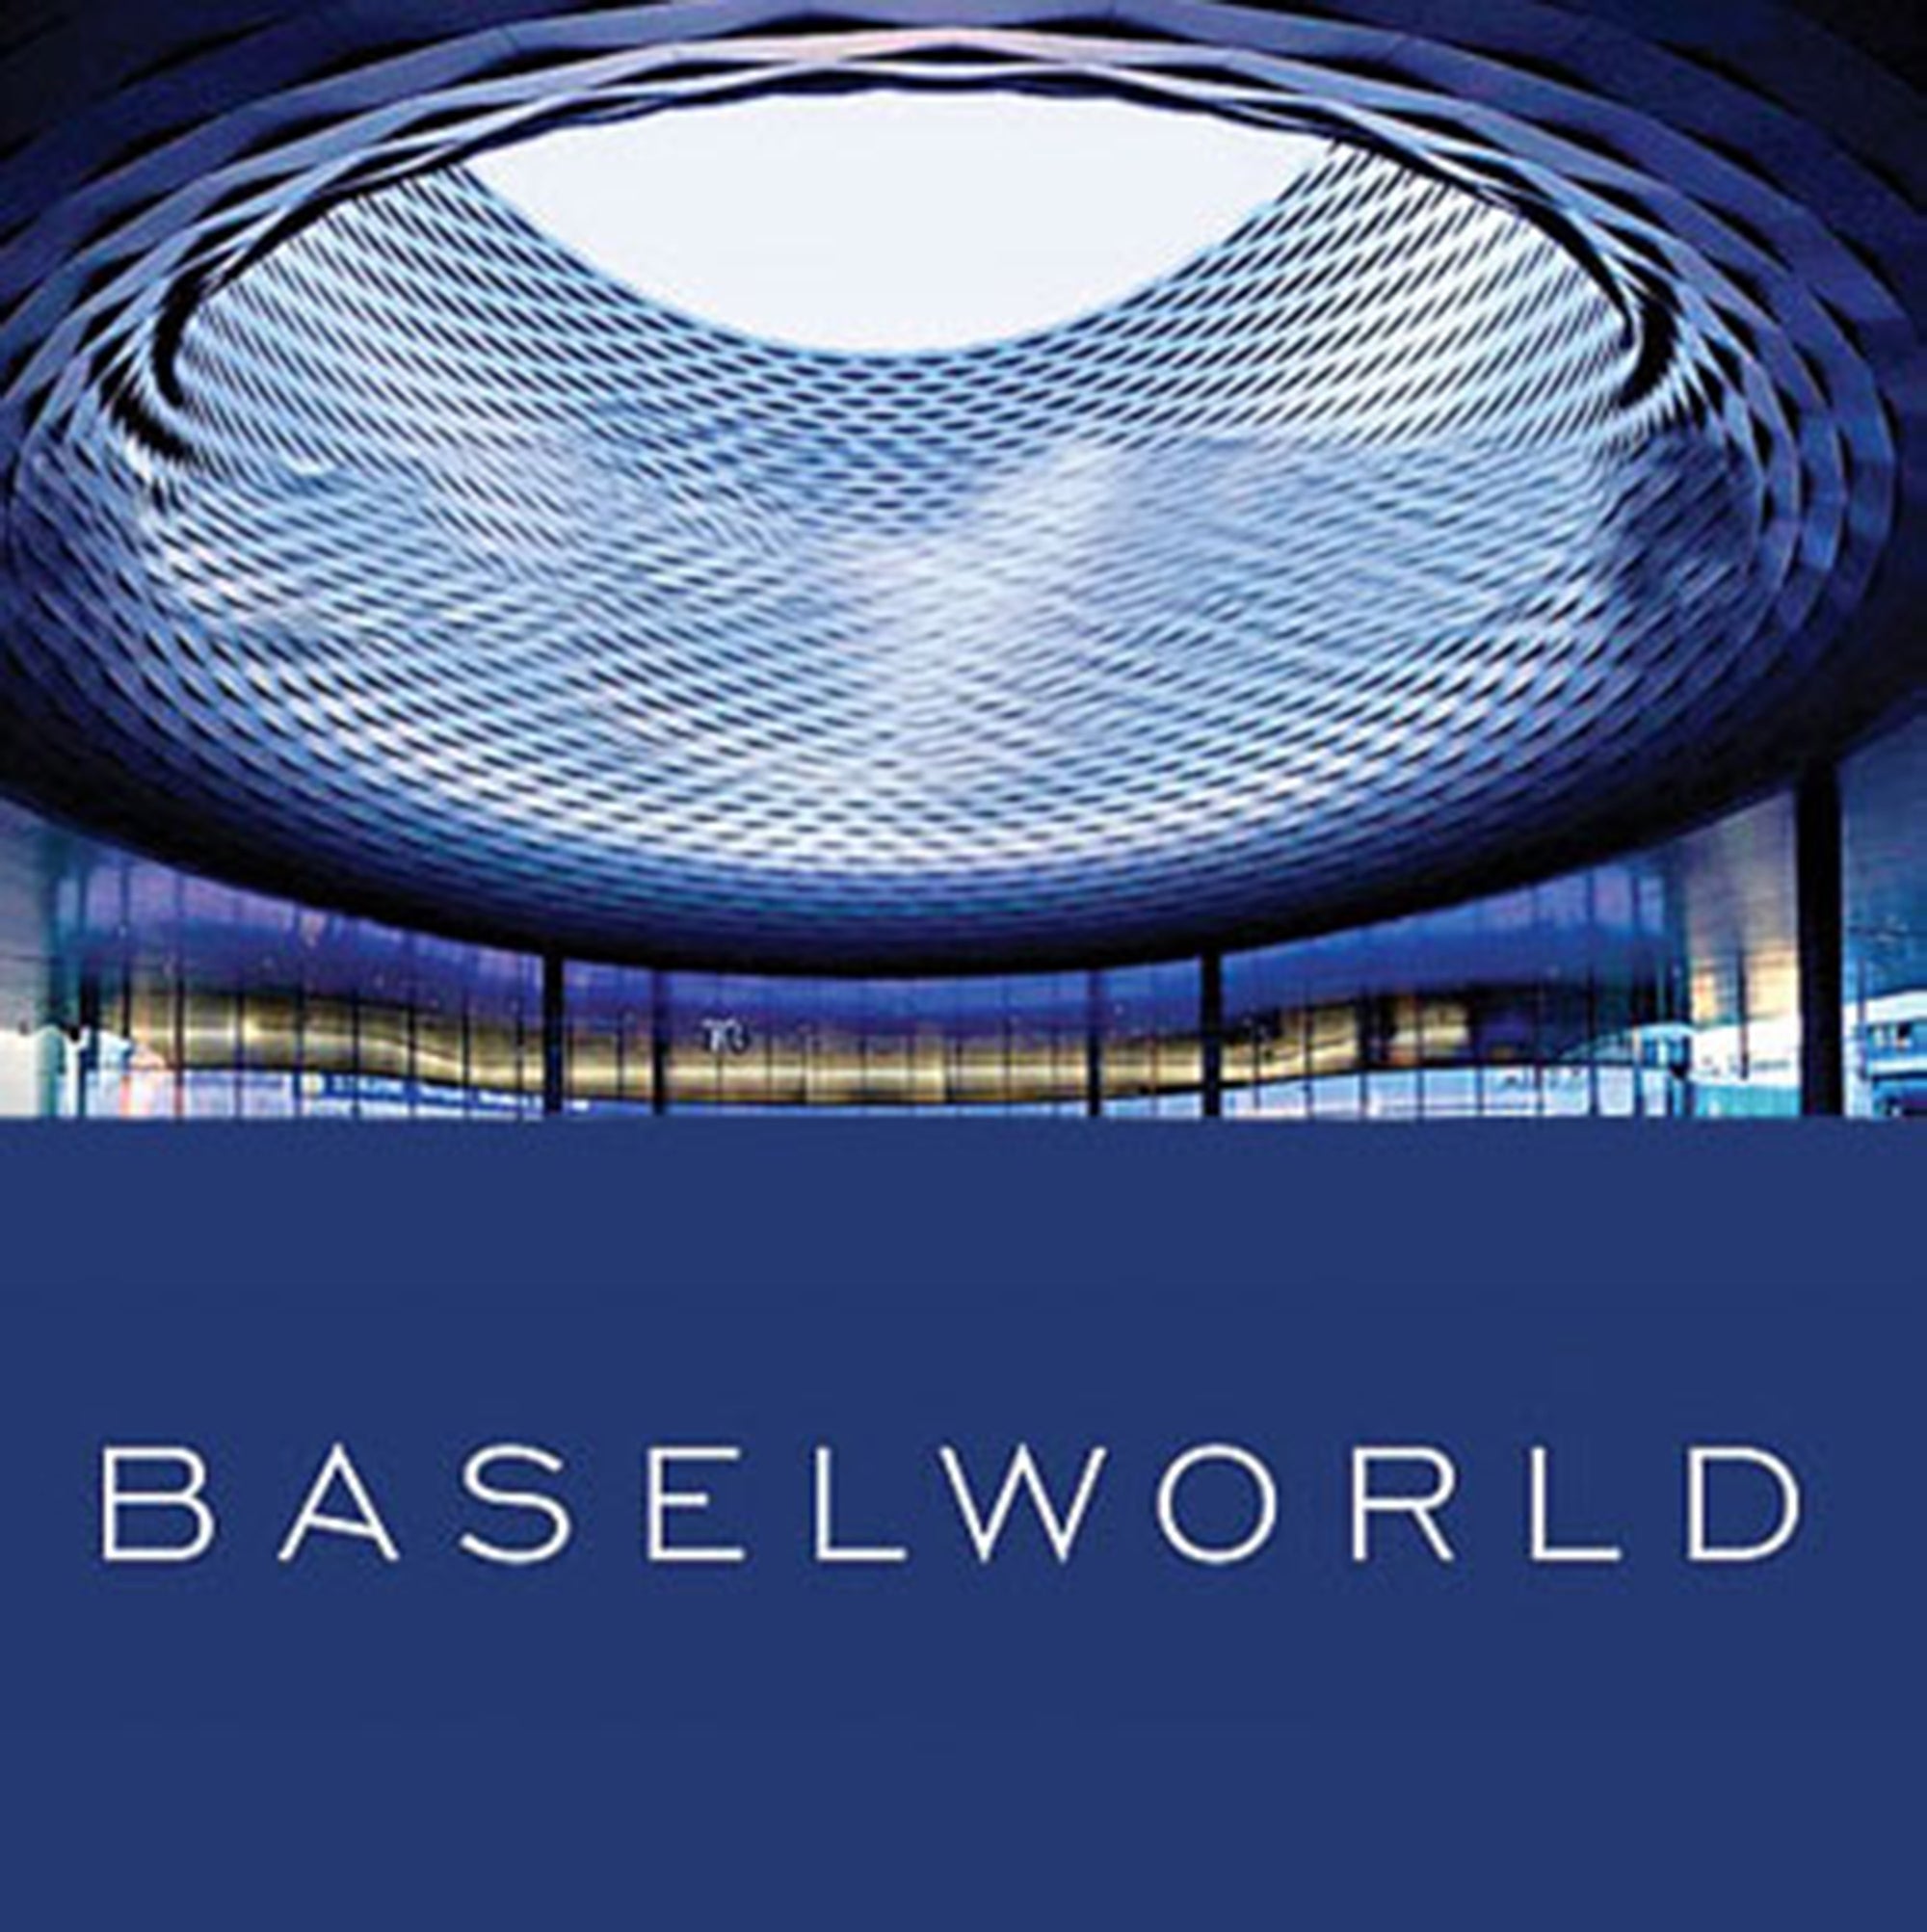 Baselworld 2019: A New Age for the World's Premier Watch Show?